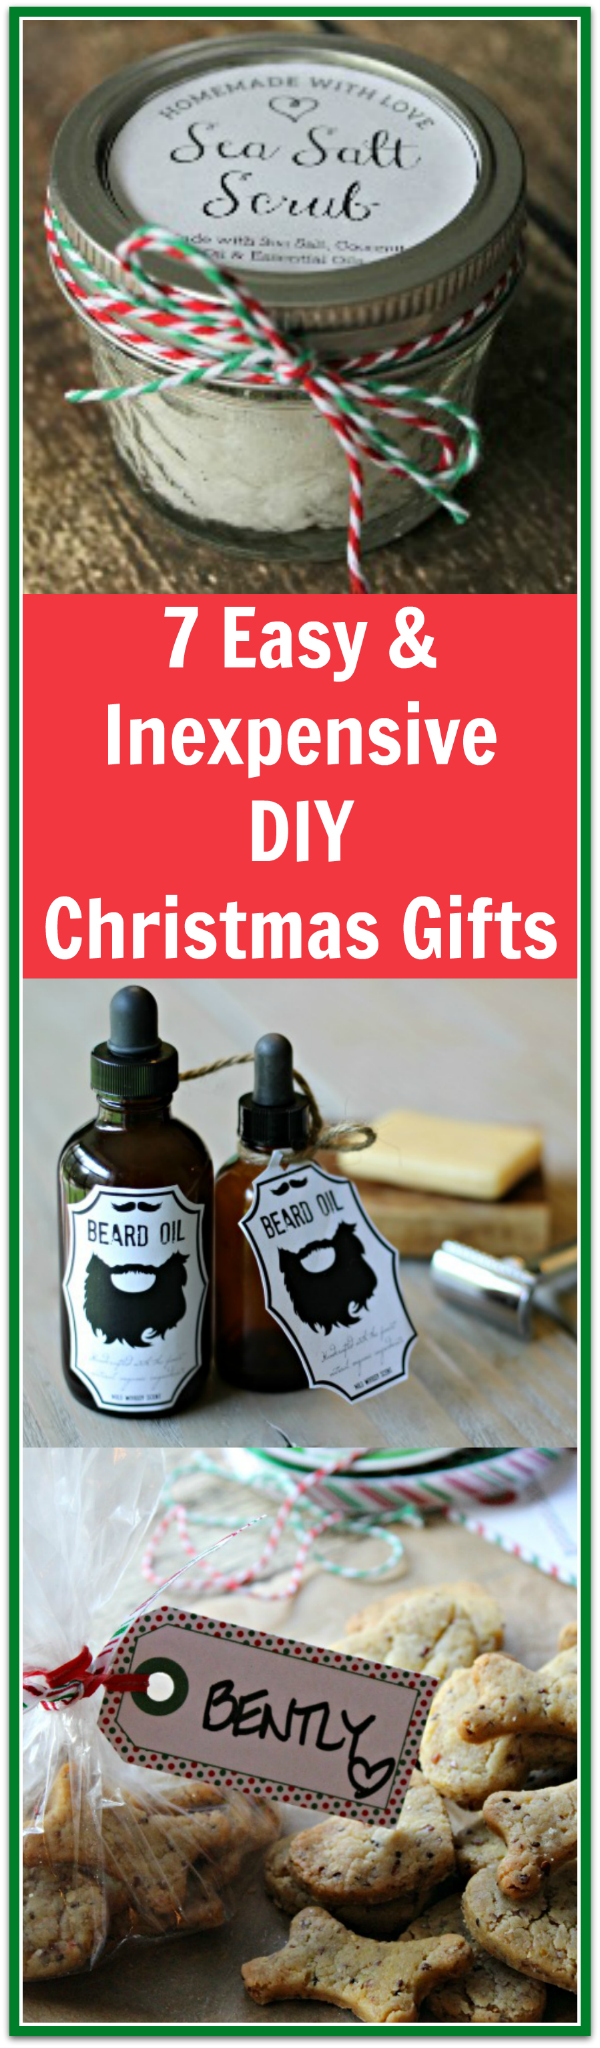 I love these simple but really nice diy christmas gift ideas!